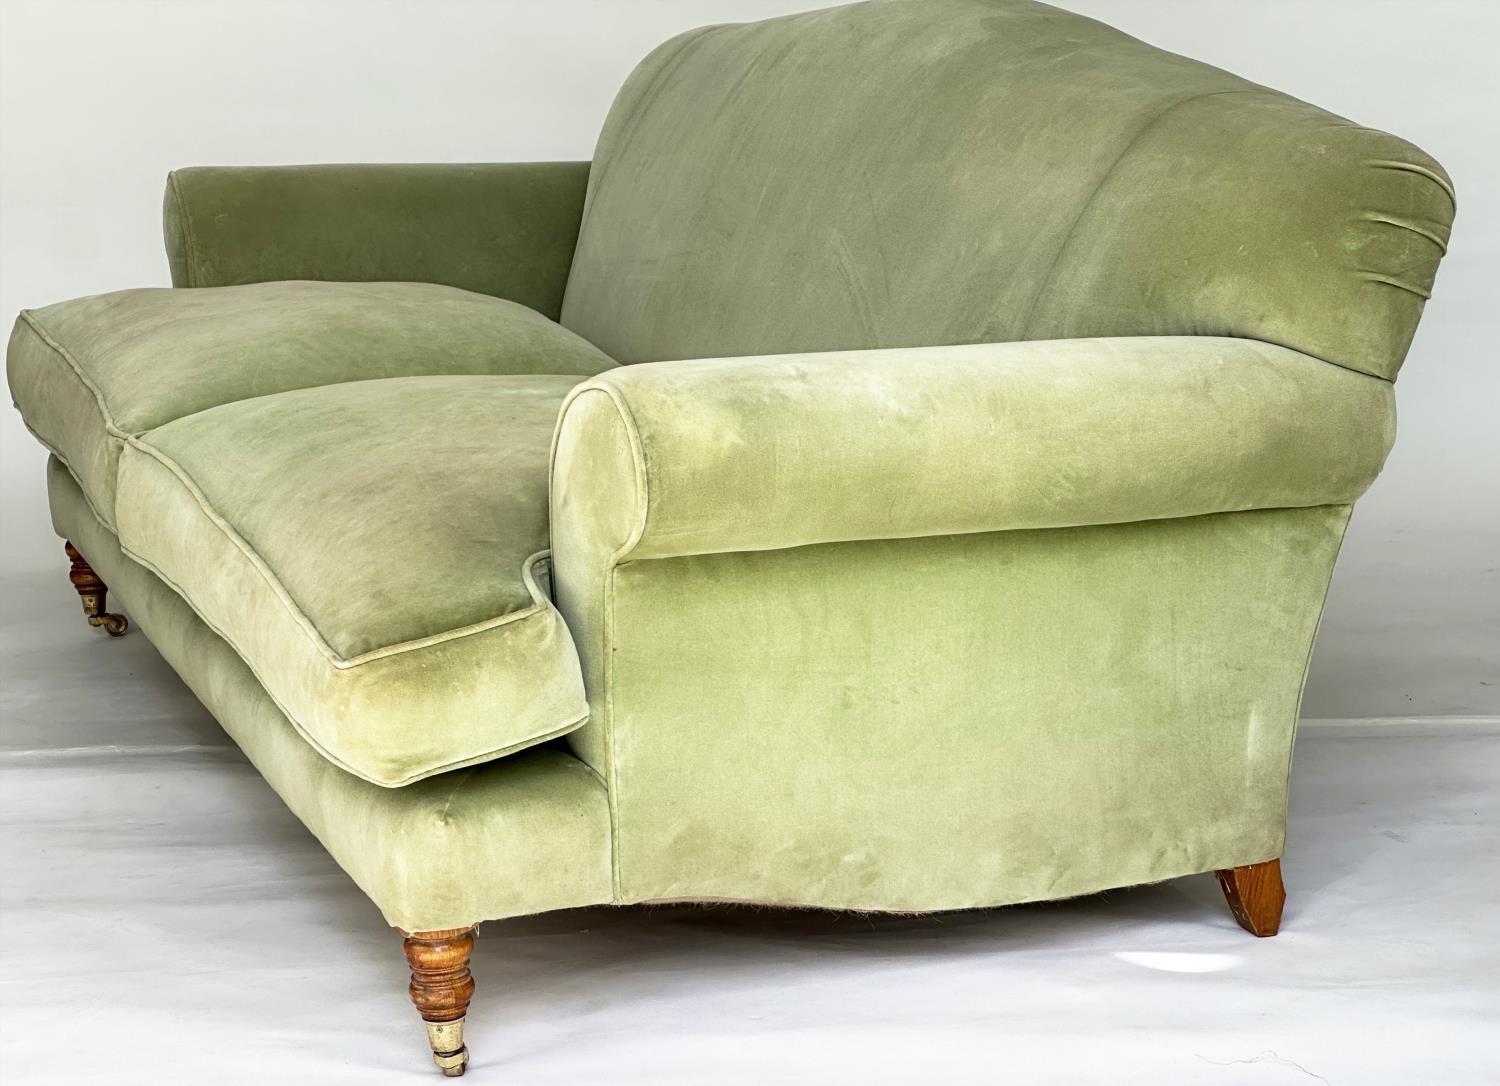 SOFA, Howard style possibly George Smith with green velvet upholstery, feather filled cushions and - Image 2 of 3